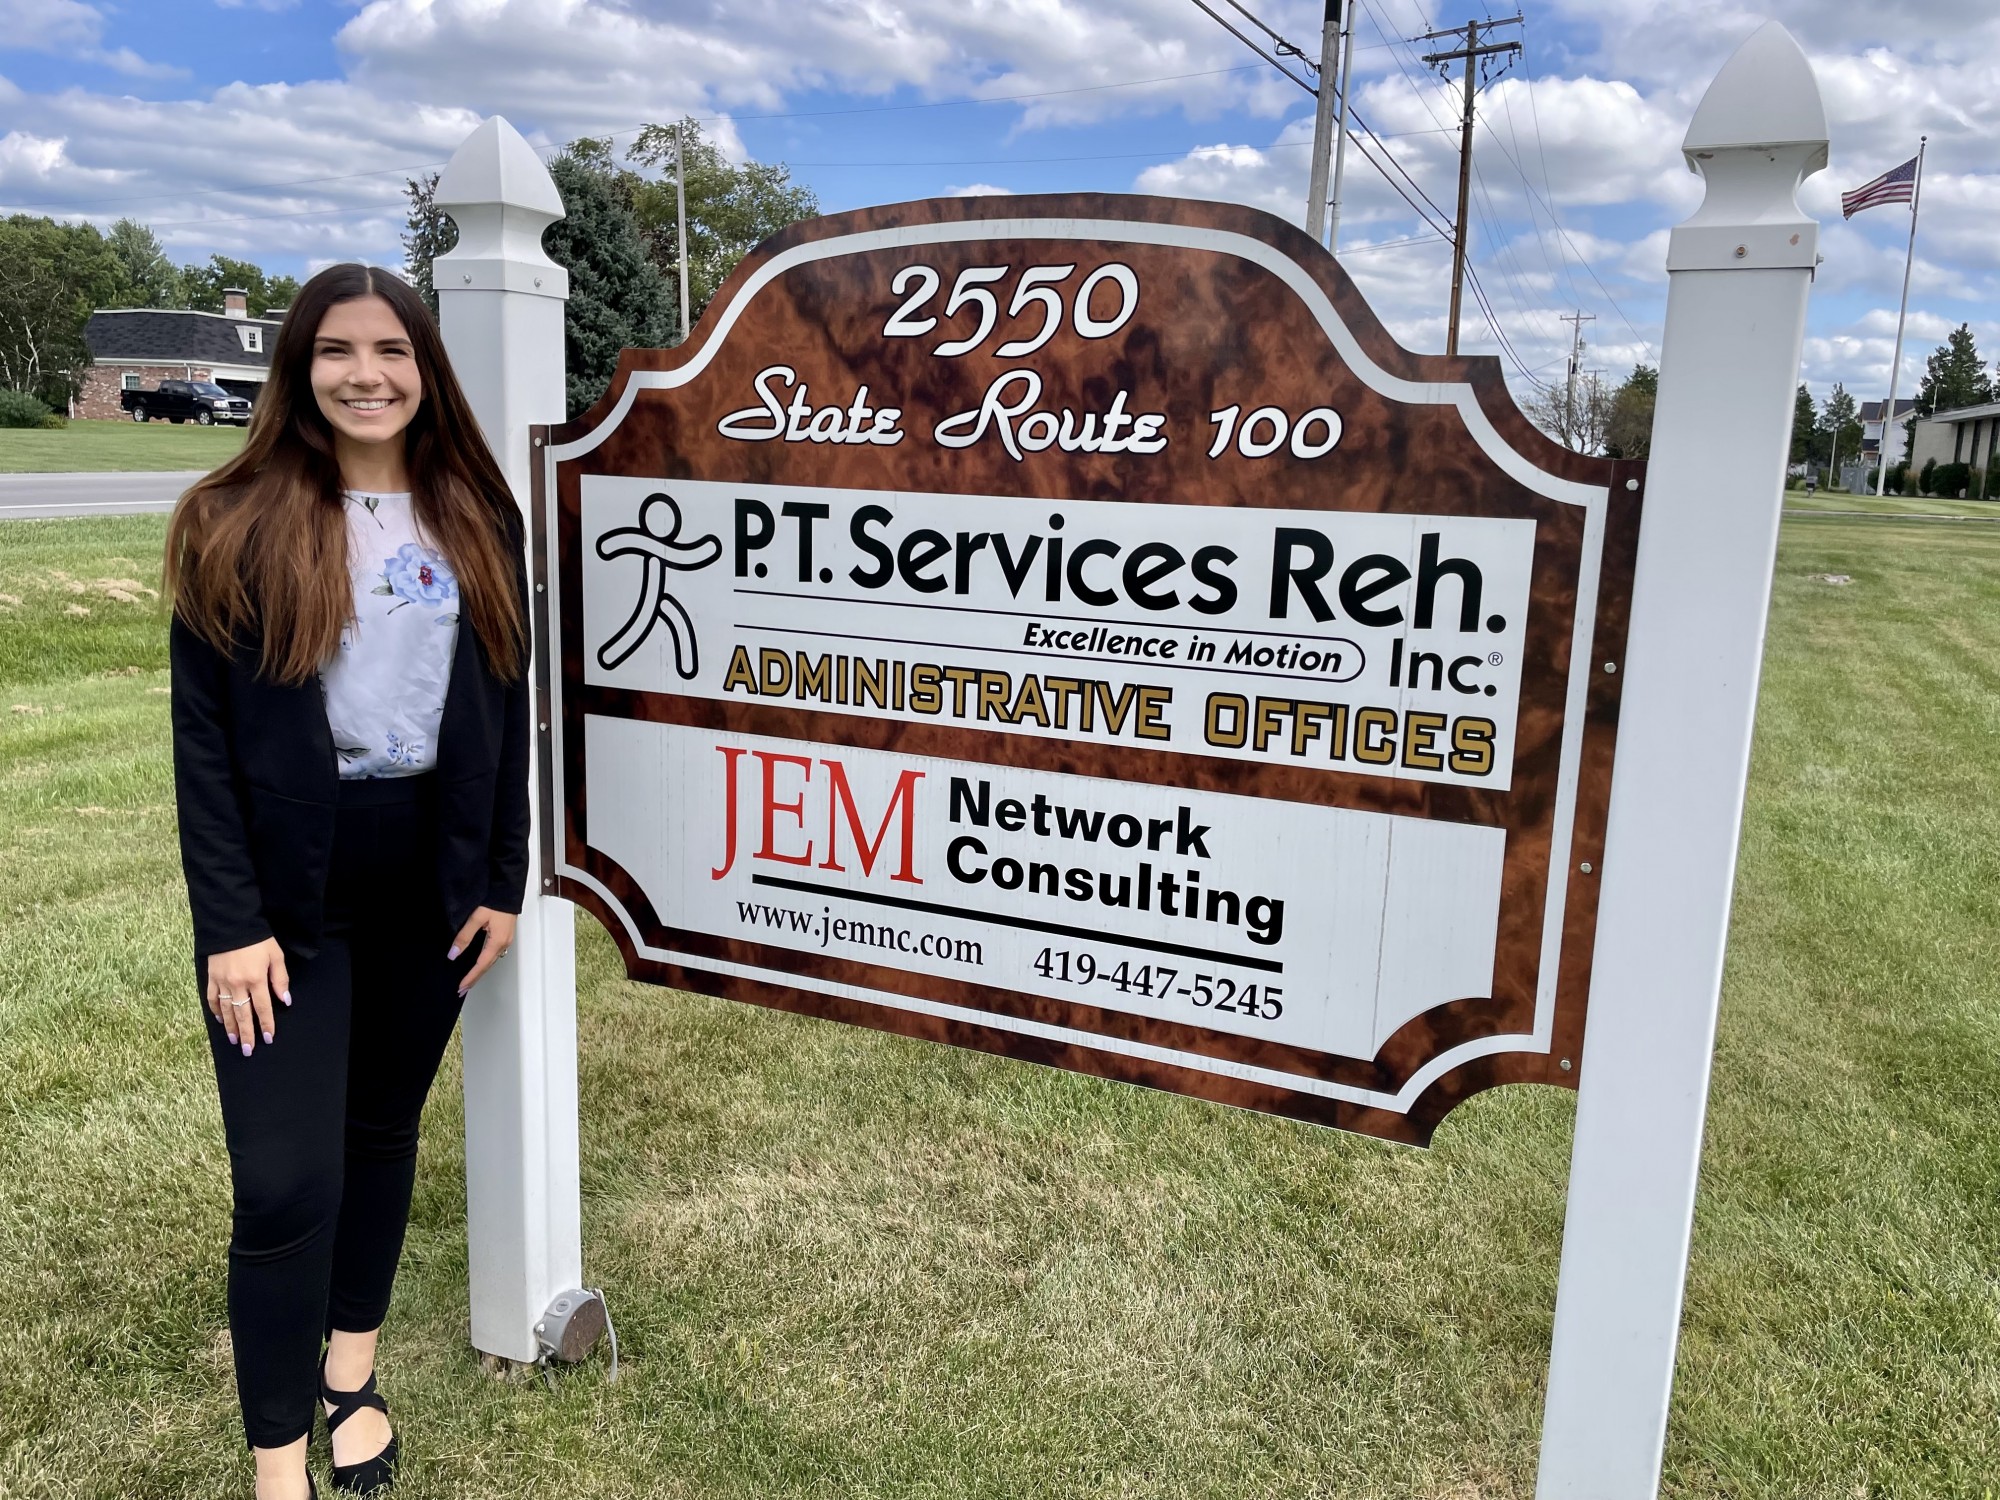 JEM Networking Consulting Adds Local Face